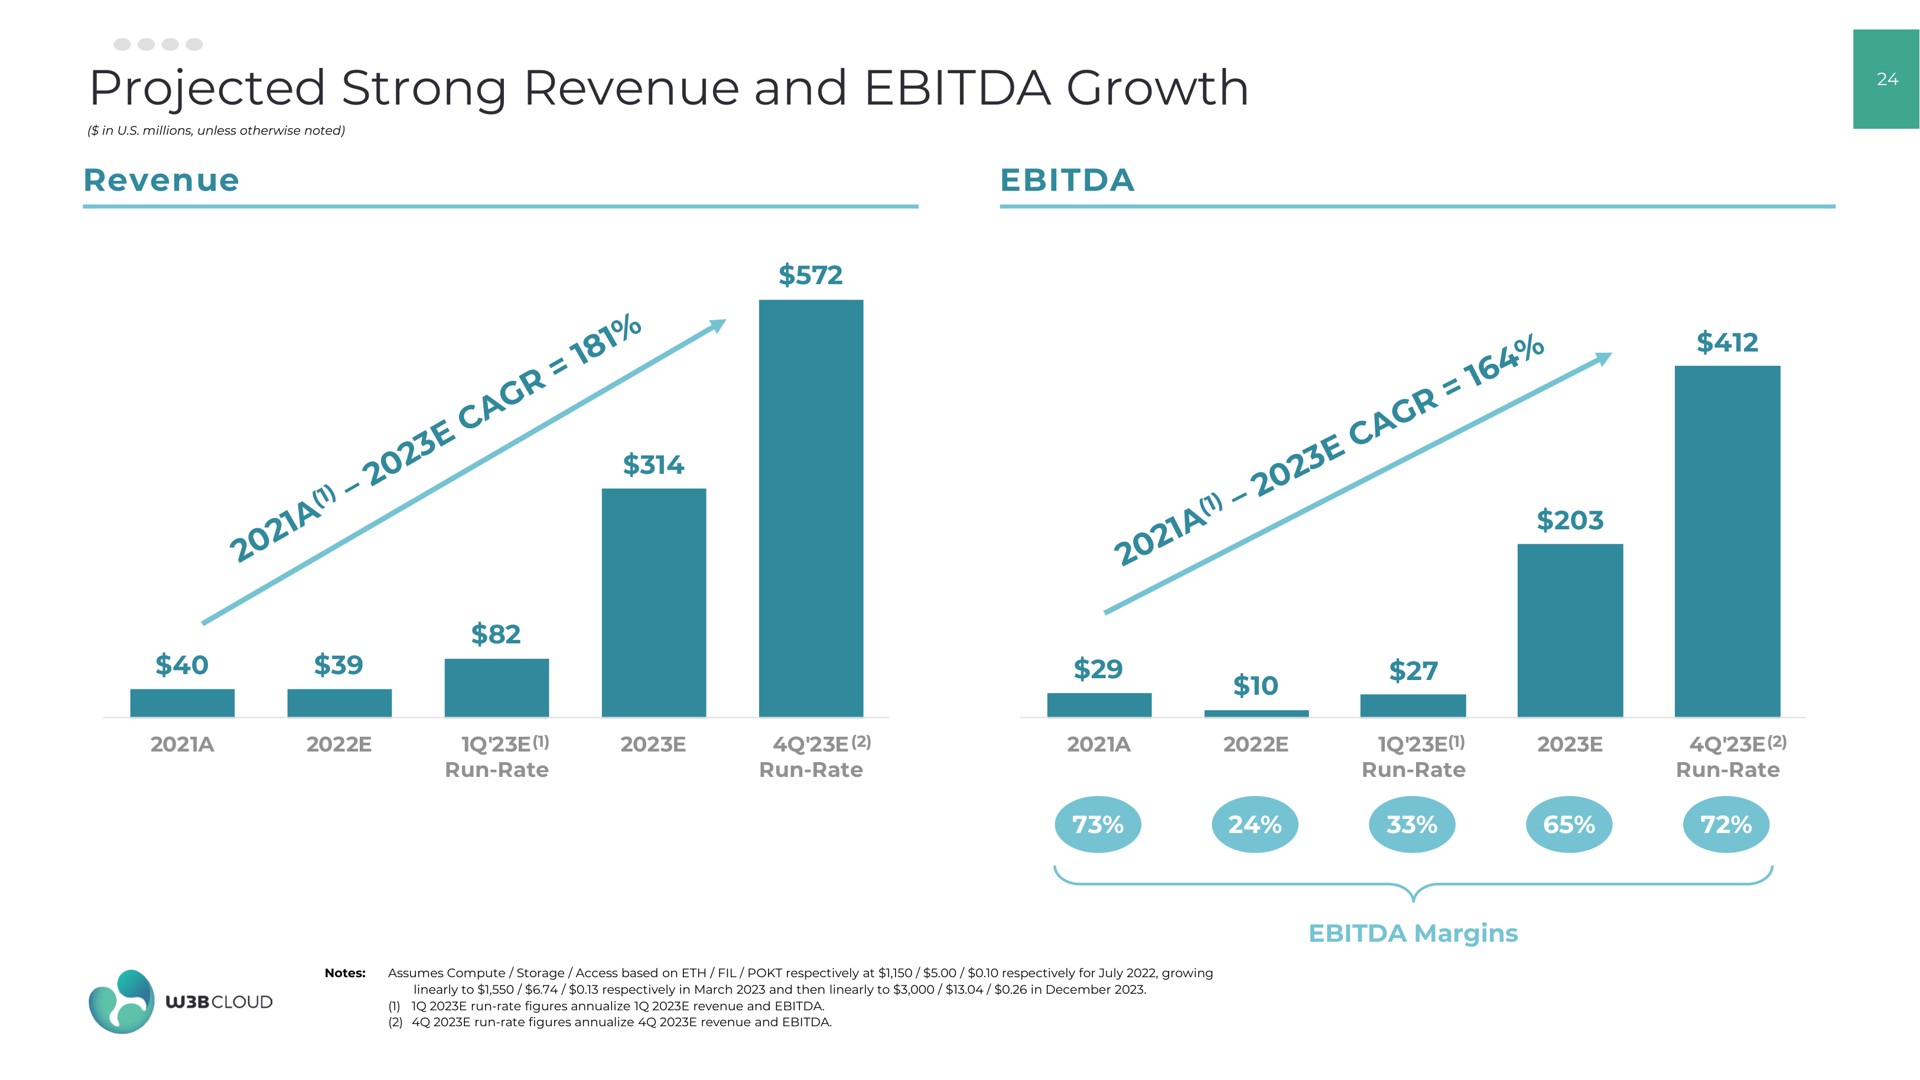 projected strong revenue and growth | W3BCLOUD